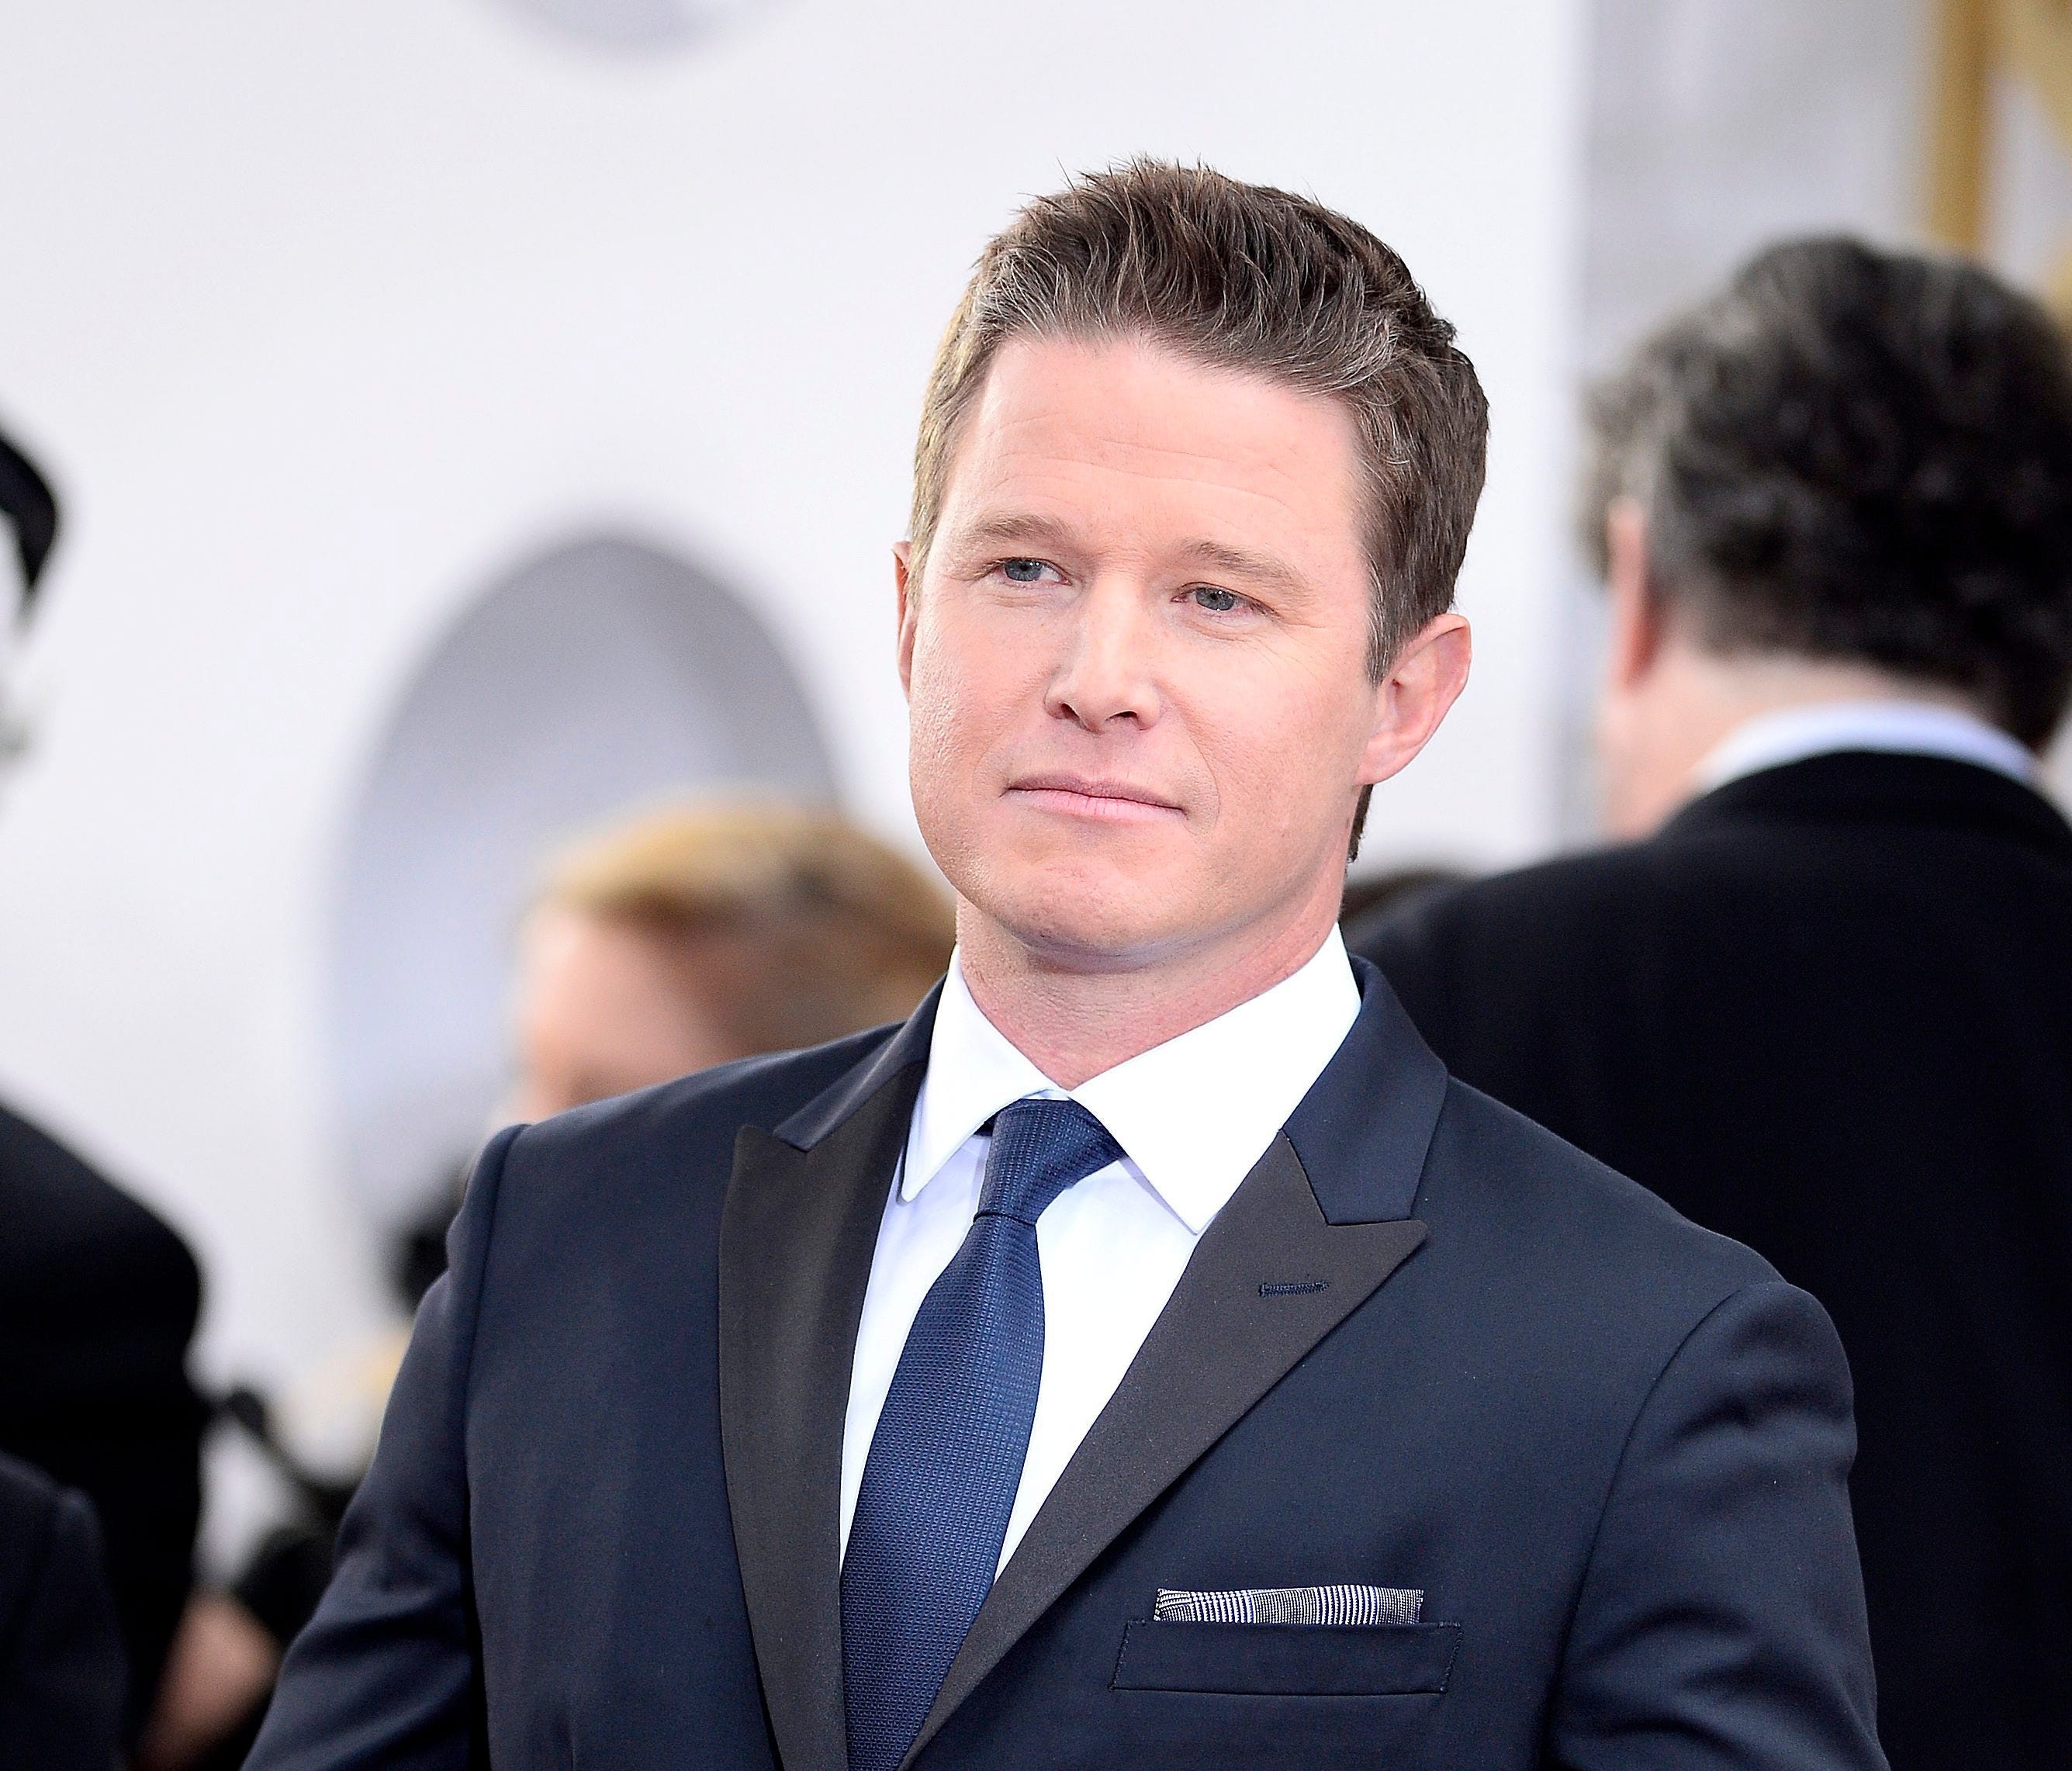 Billy Bush and his wife of nearly 20 years have separated, his publicist confirms.